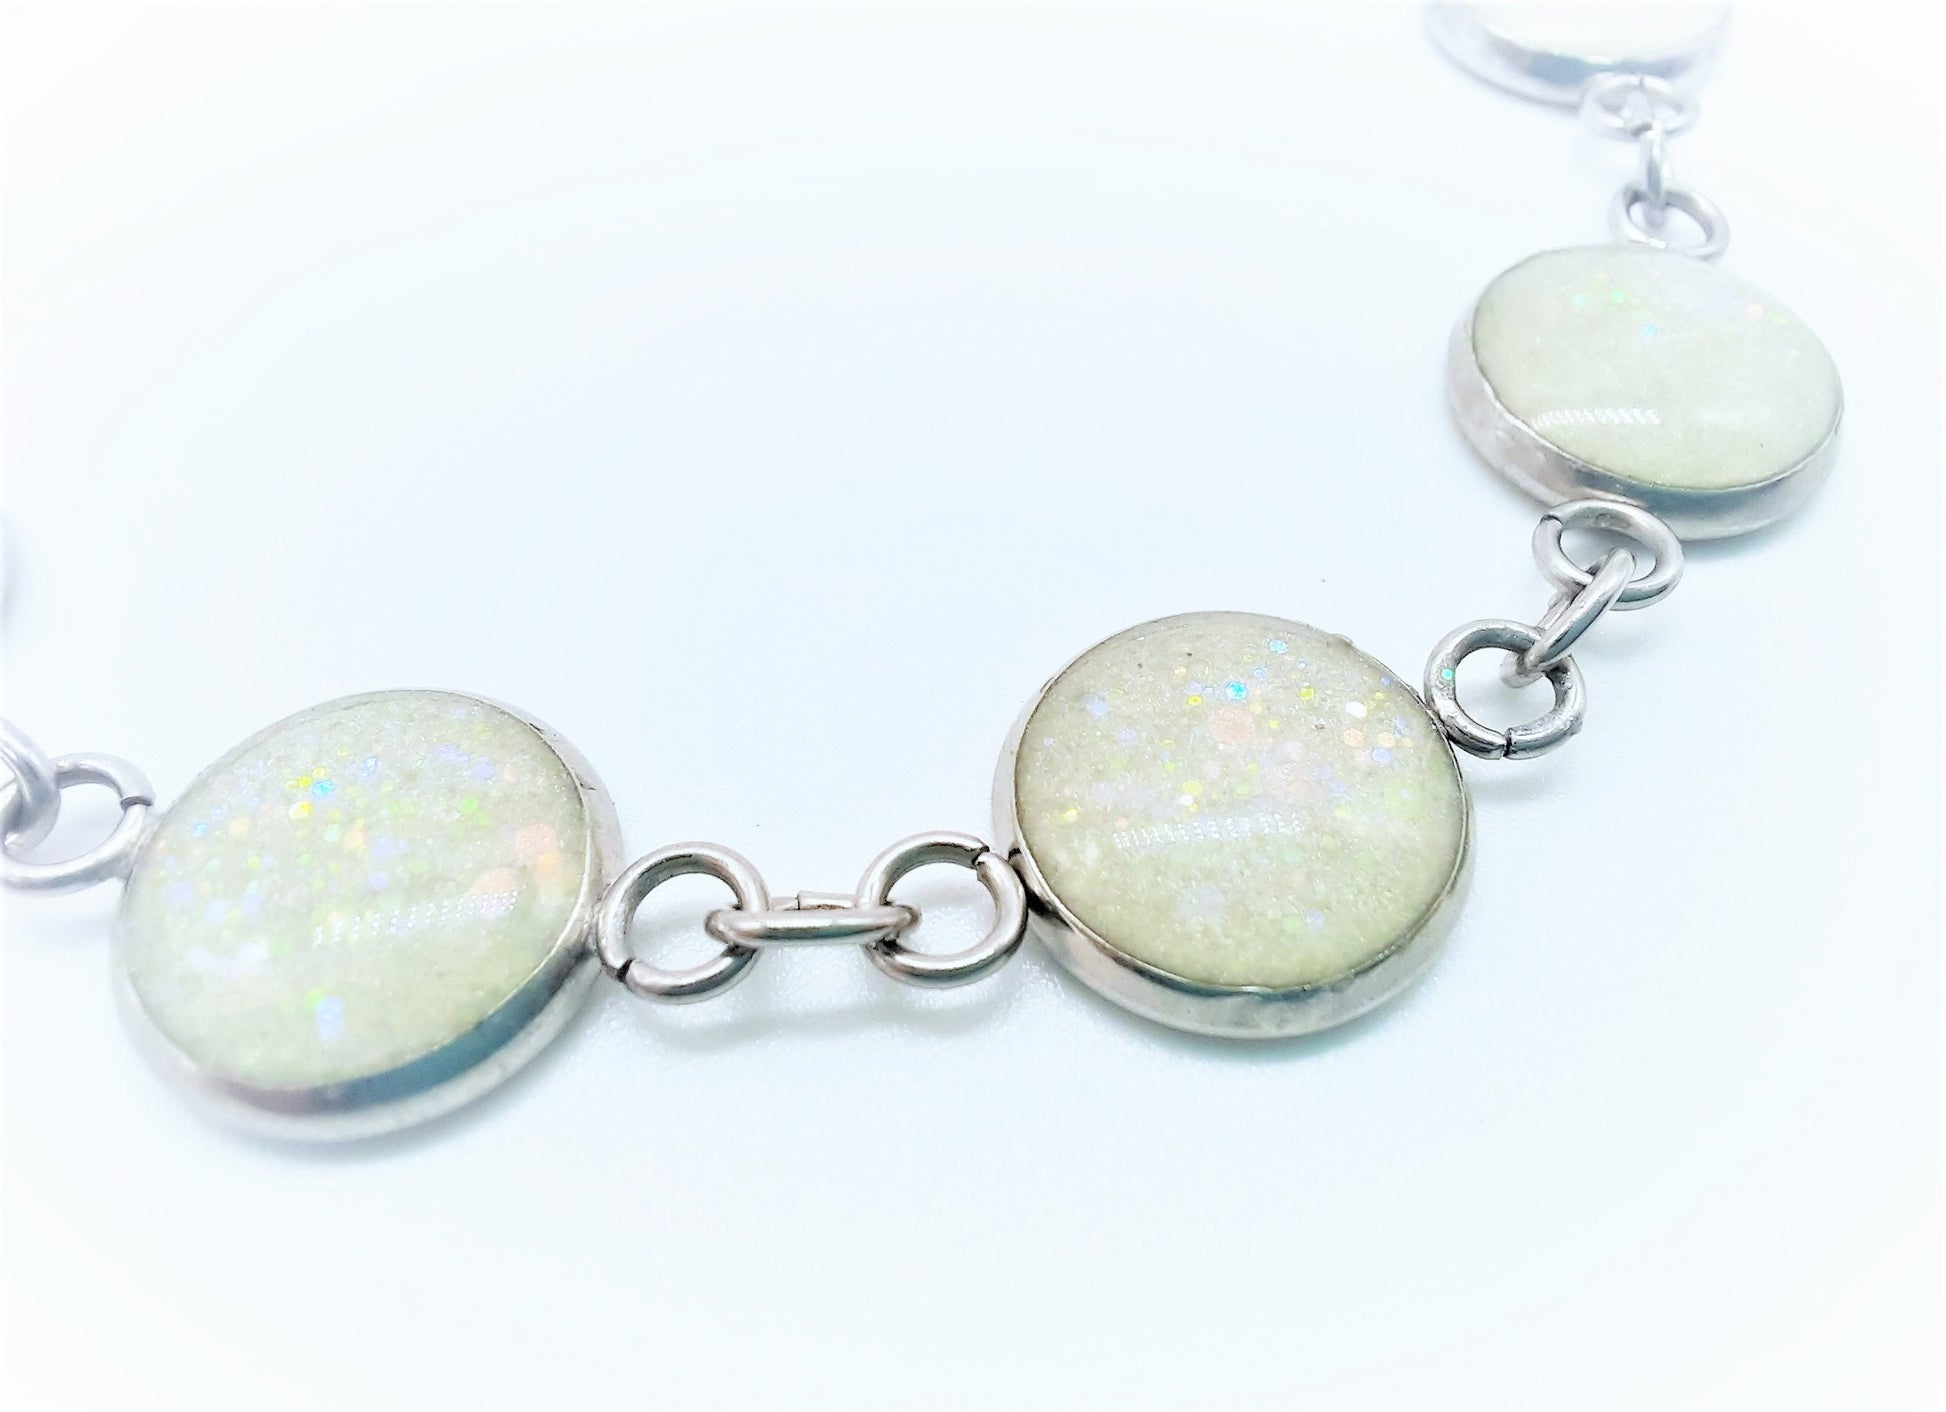 Handcrafted / Handmade Opal (like) Sparkle Resin Link Bracelet - Made with Resin, Mica, Iridescent Glitter, & Holographic Powder